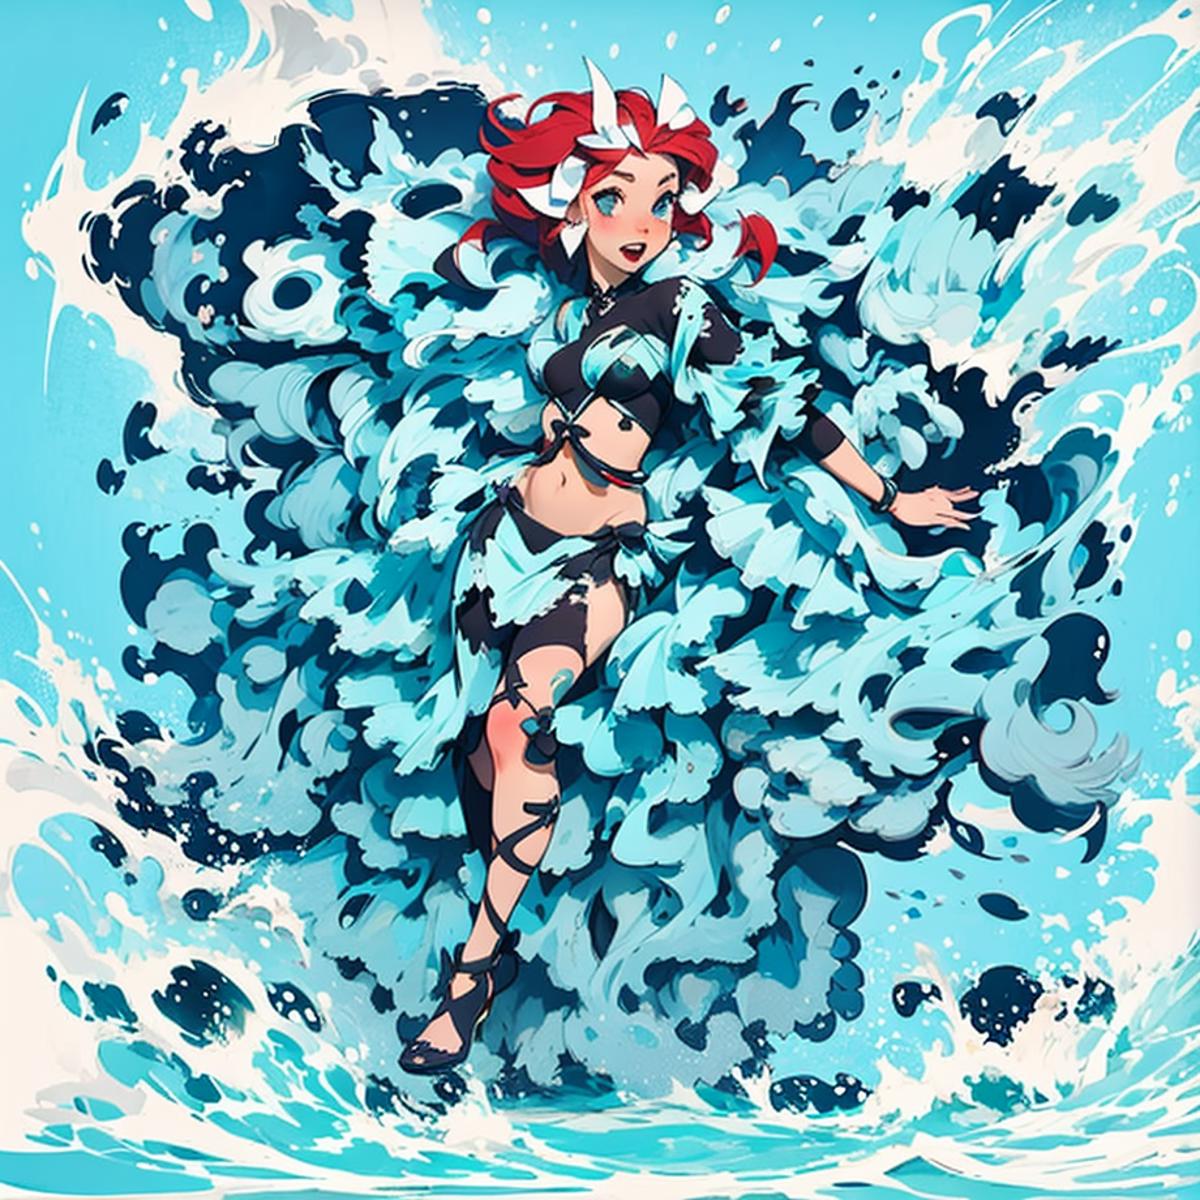 A Cartoon Image of a Woman in a Blue Dress and White Boa Standing in Water.